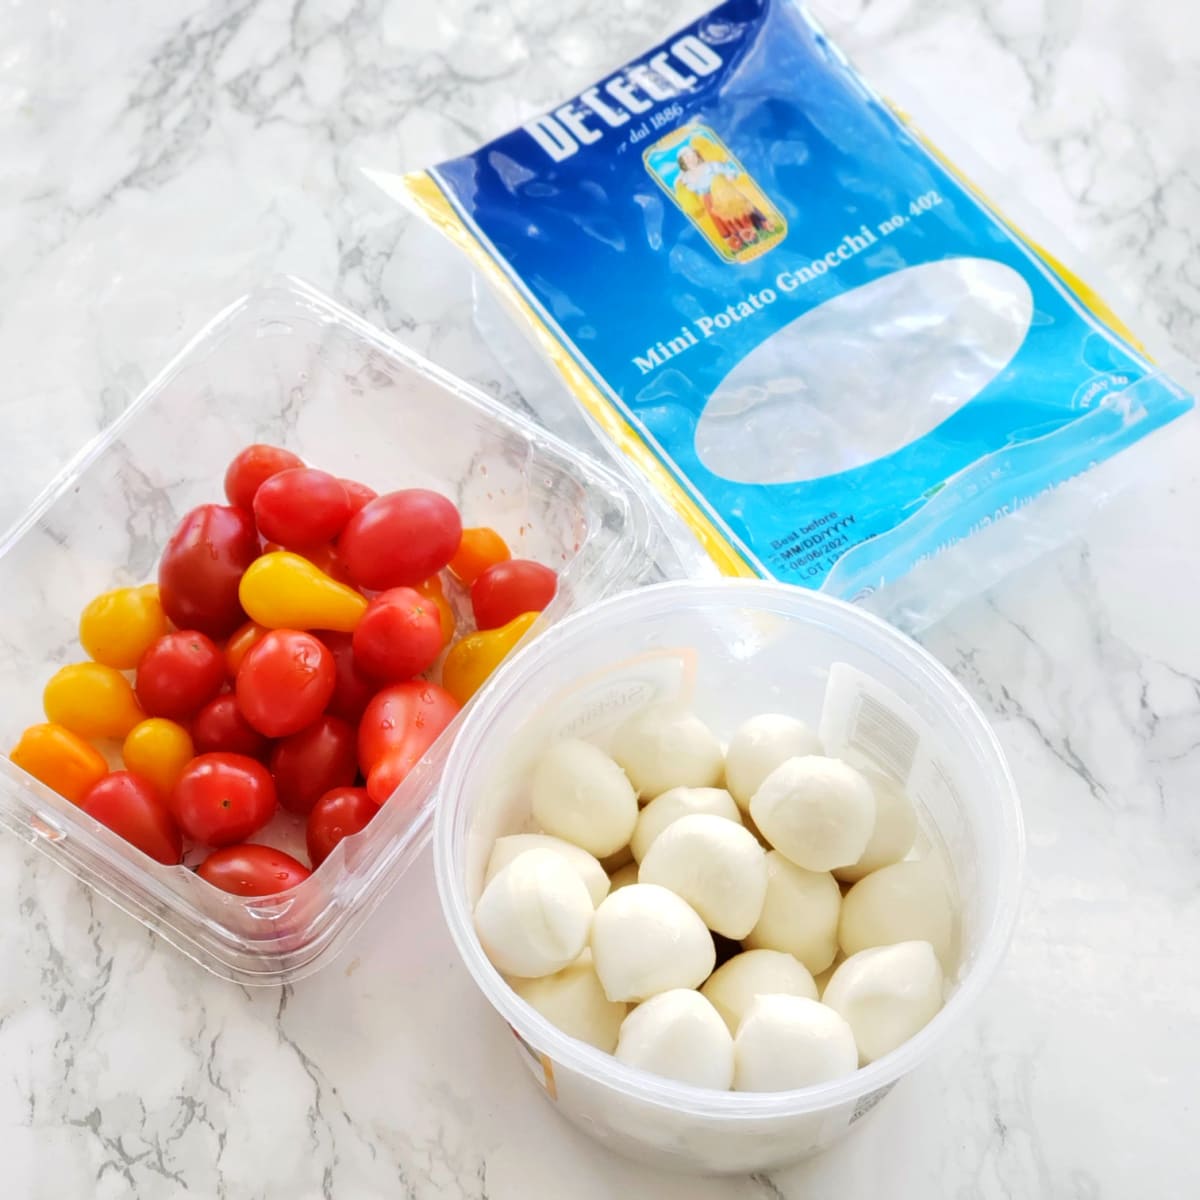 Ingredients for Sheet Pan Gnocchi with Cherry Tomatoes, Mozzarella and Arugula on a white marble counter on ShockinglyDelicious.com